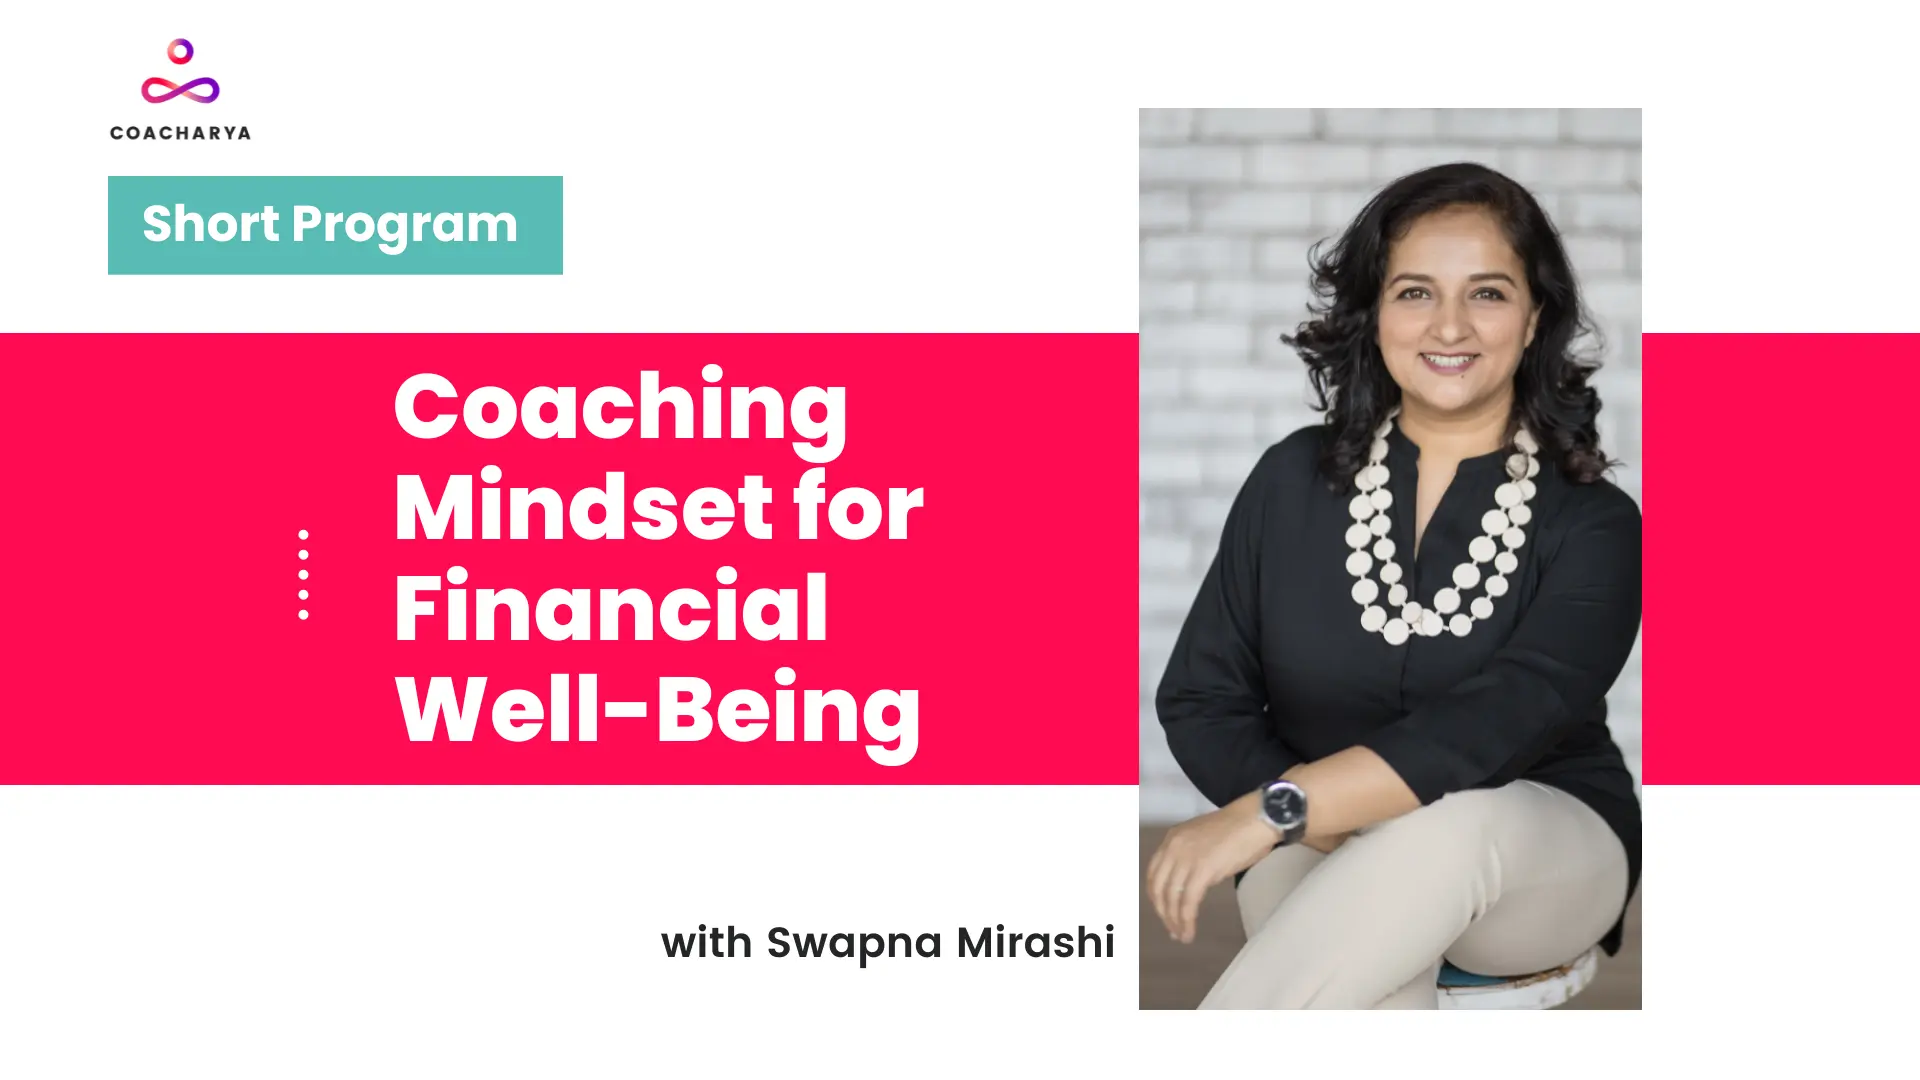 Coaching Mindset for Financial Well-Being